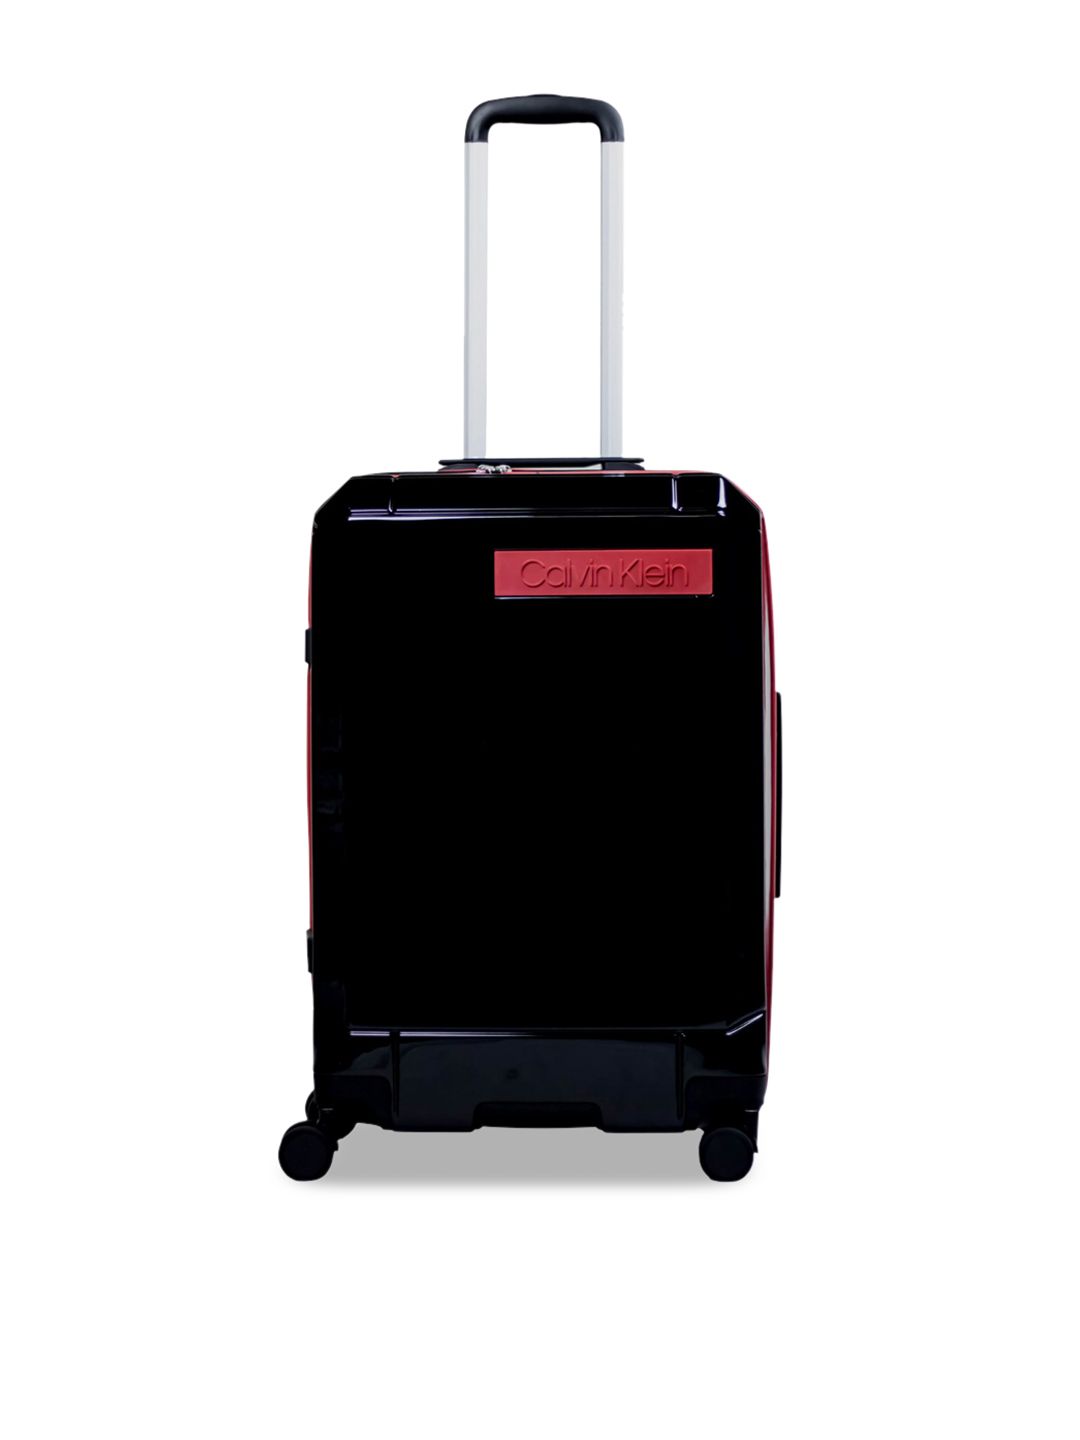 Calvin Klein Black & Red Solid Hard-Sided Medium Trolley Suitcase Price in India